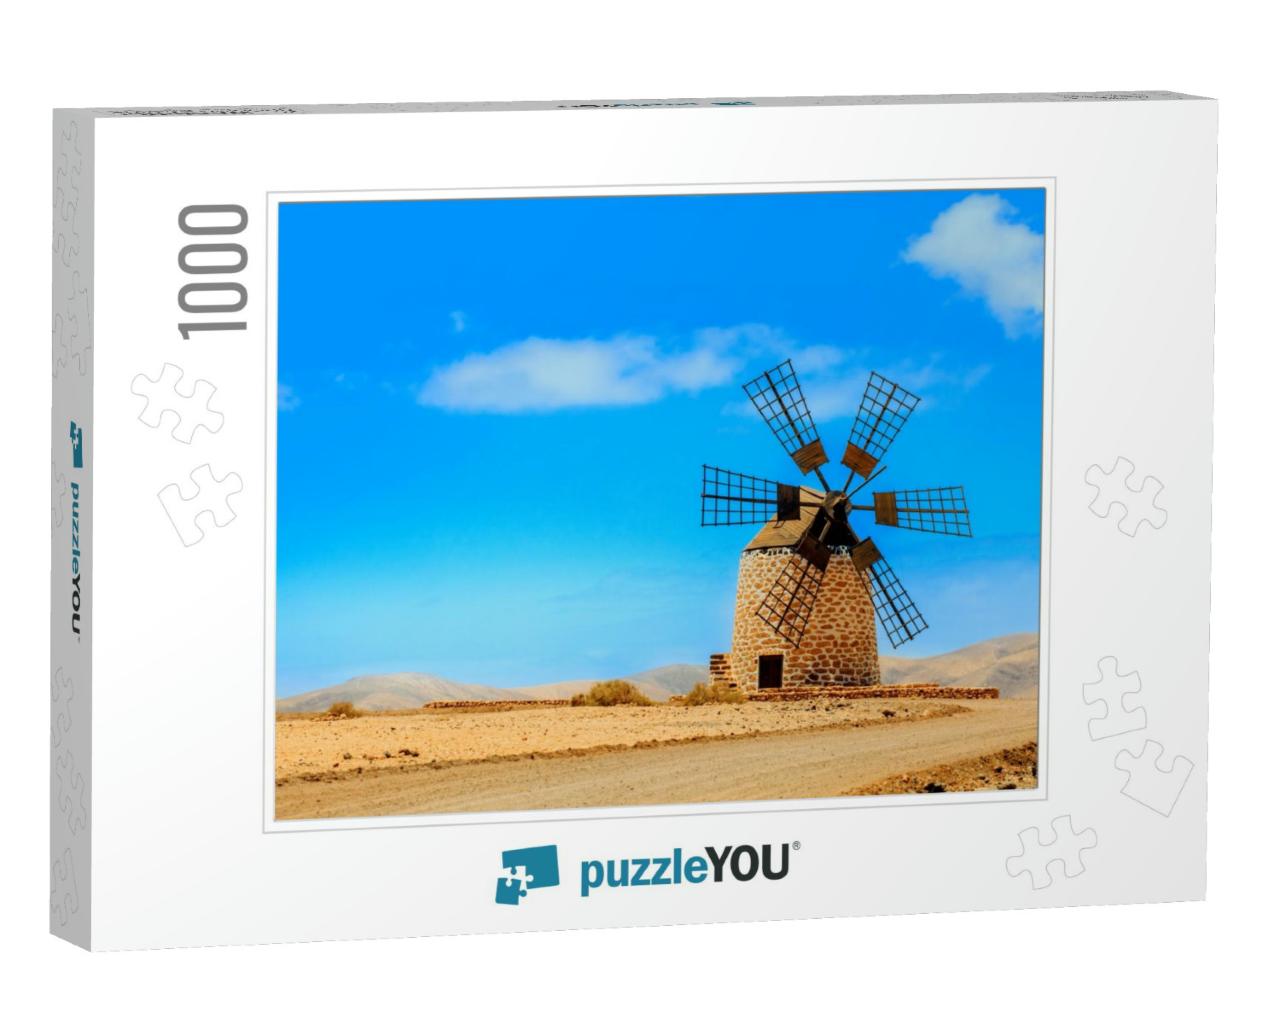 Windmill Fuerteventura. Old Windmill. Tefia Windmill Fuer... Jigsaw Puzzle with 1000 pieces